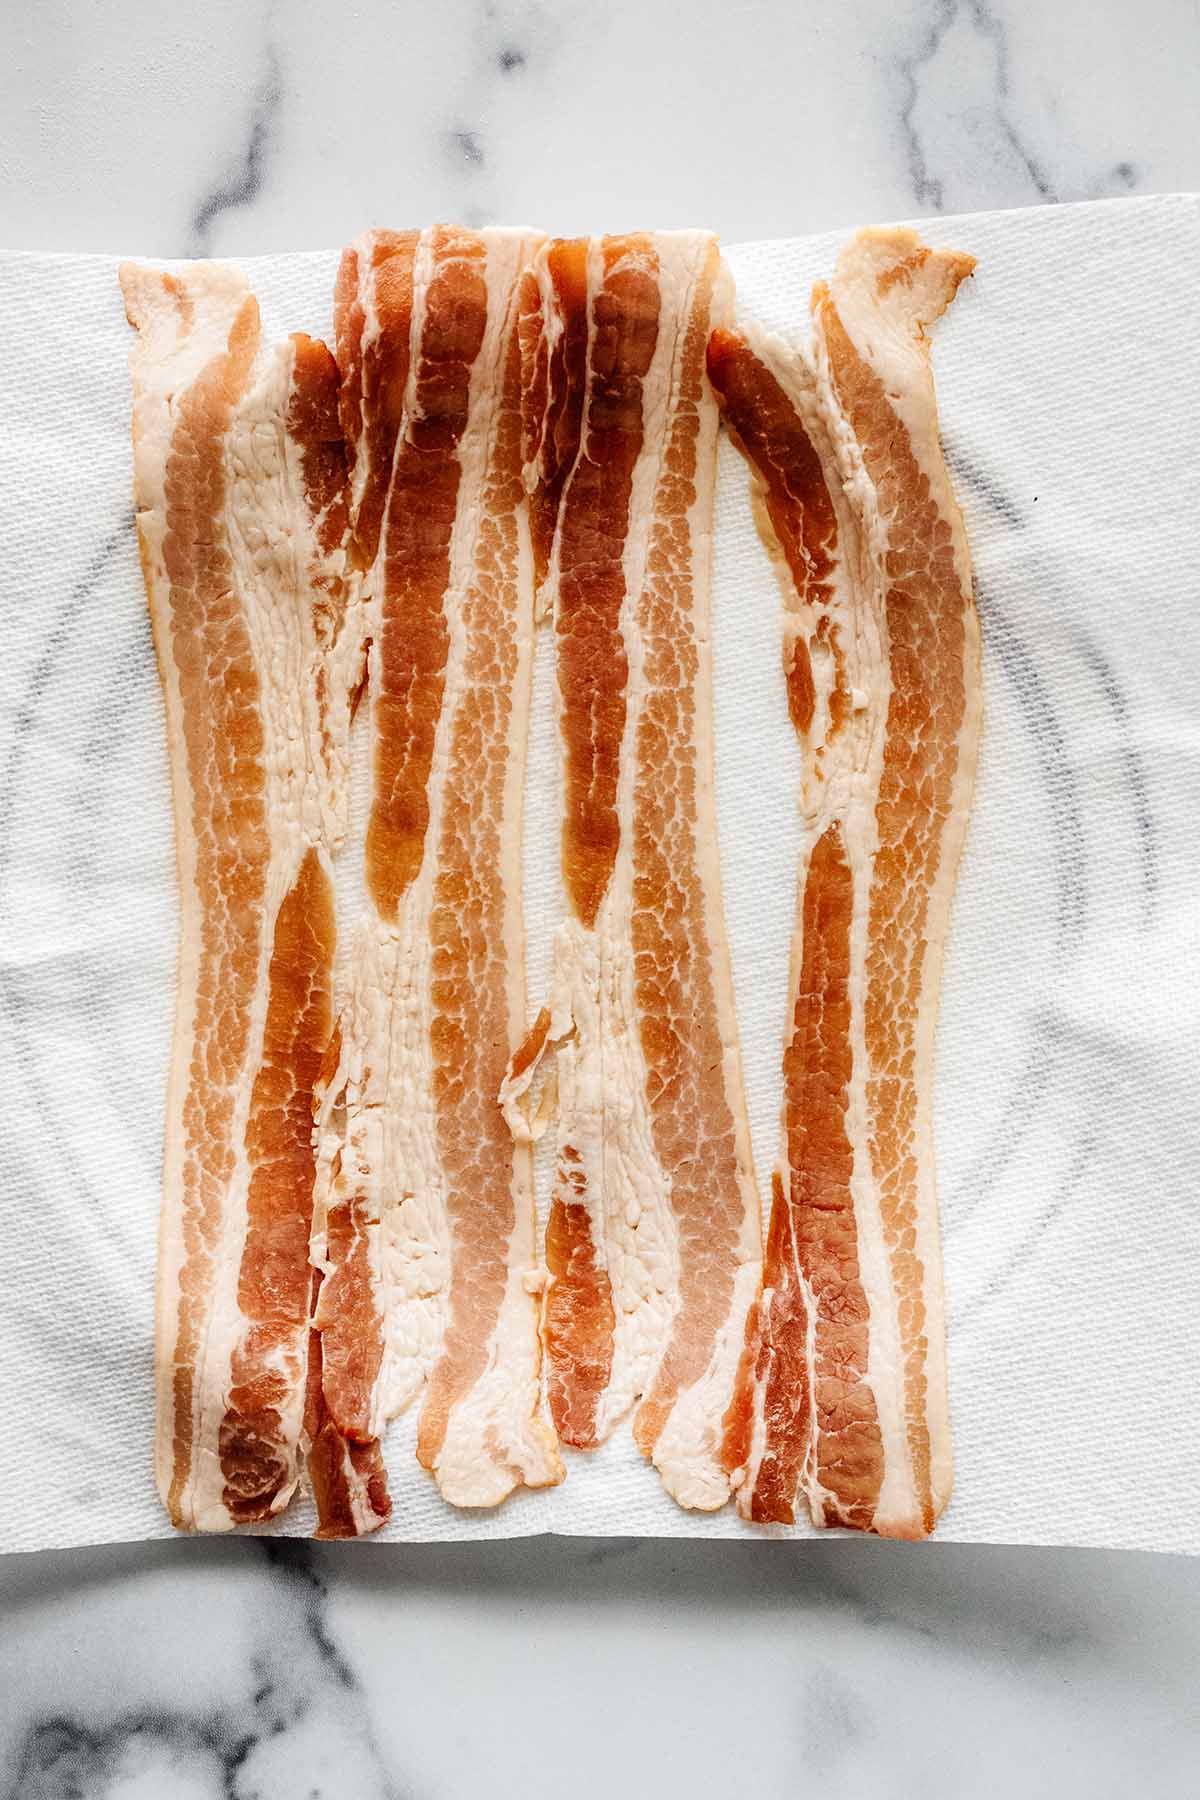 Four strips of bacon on a paper towel on a large plate.